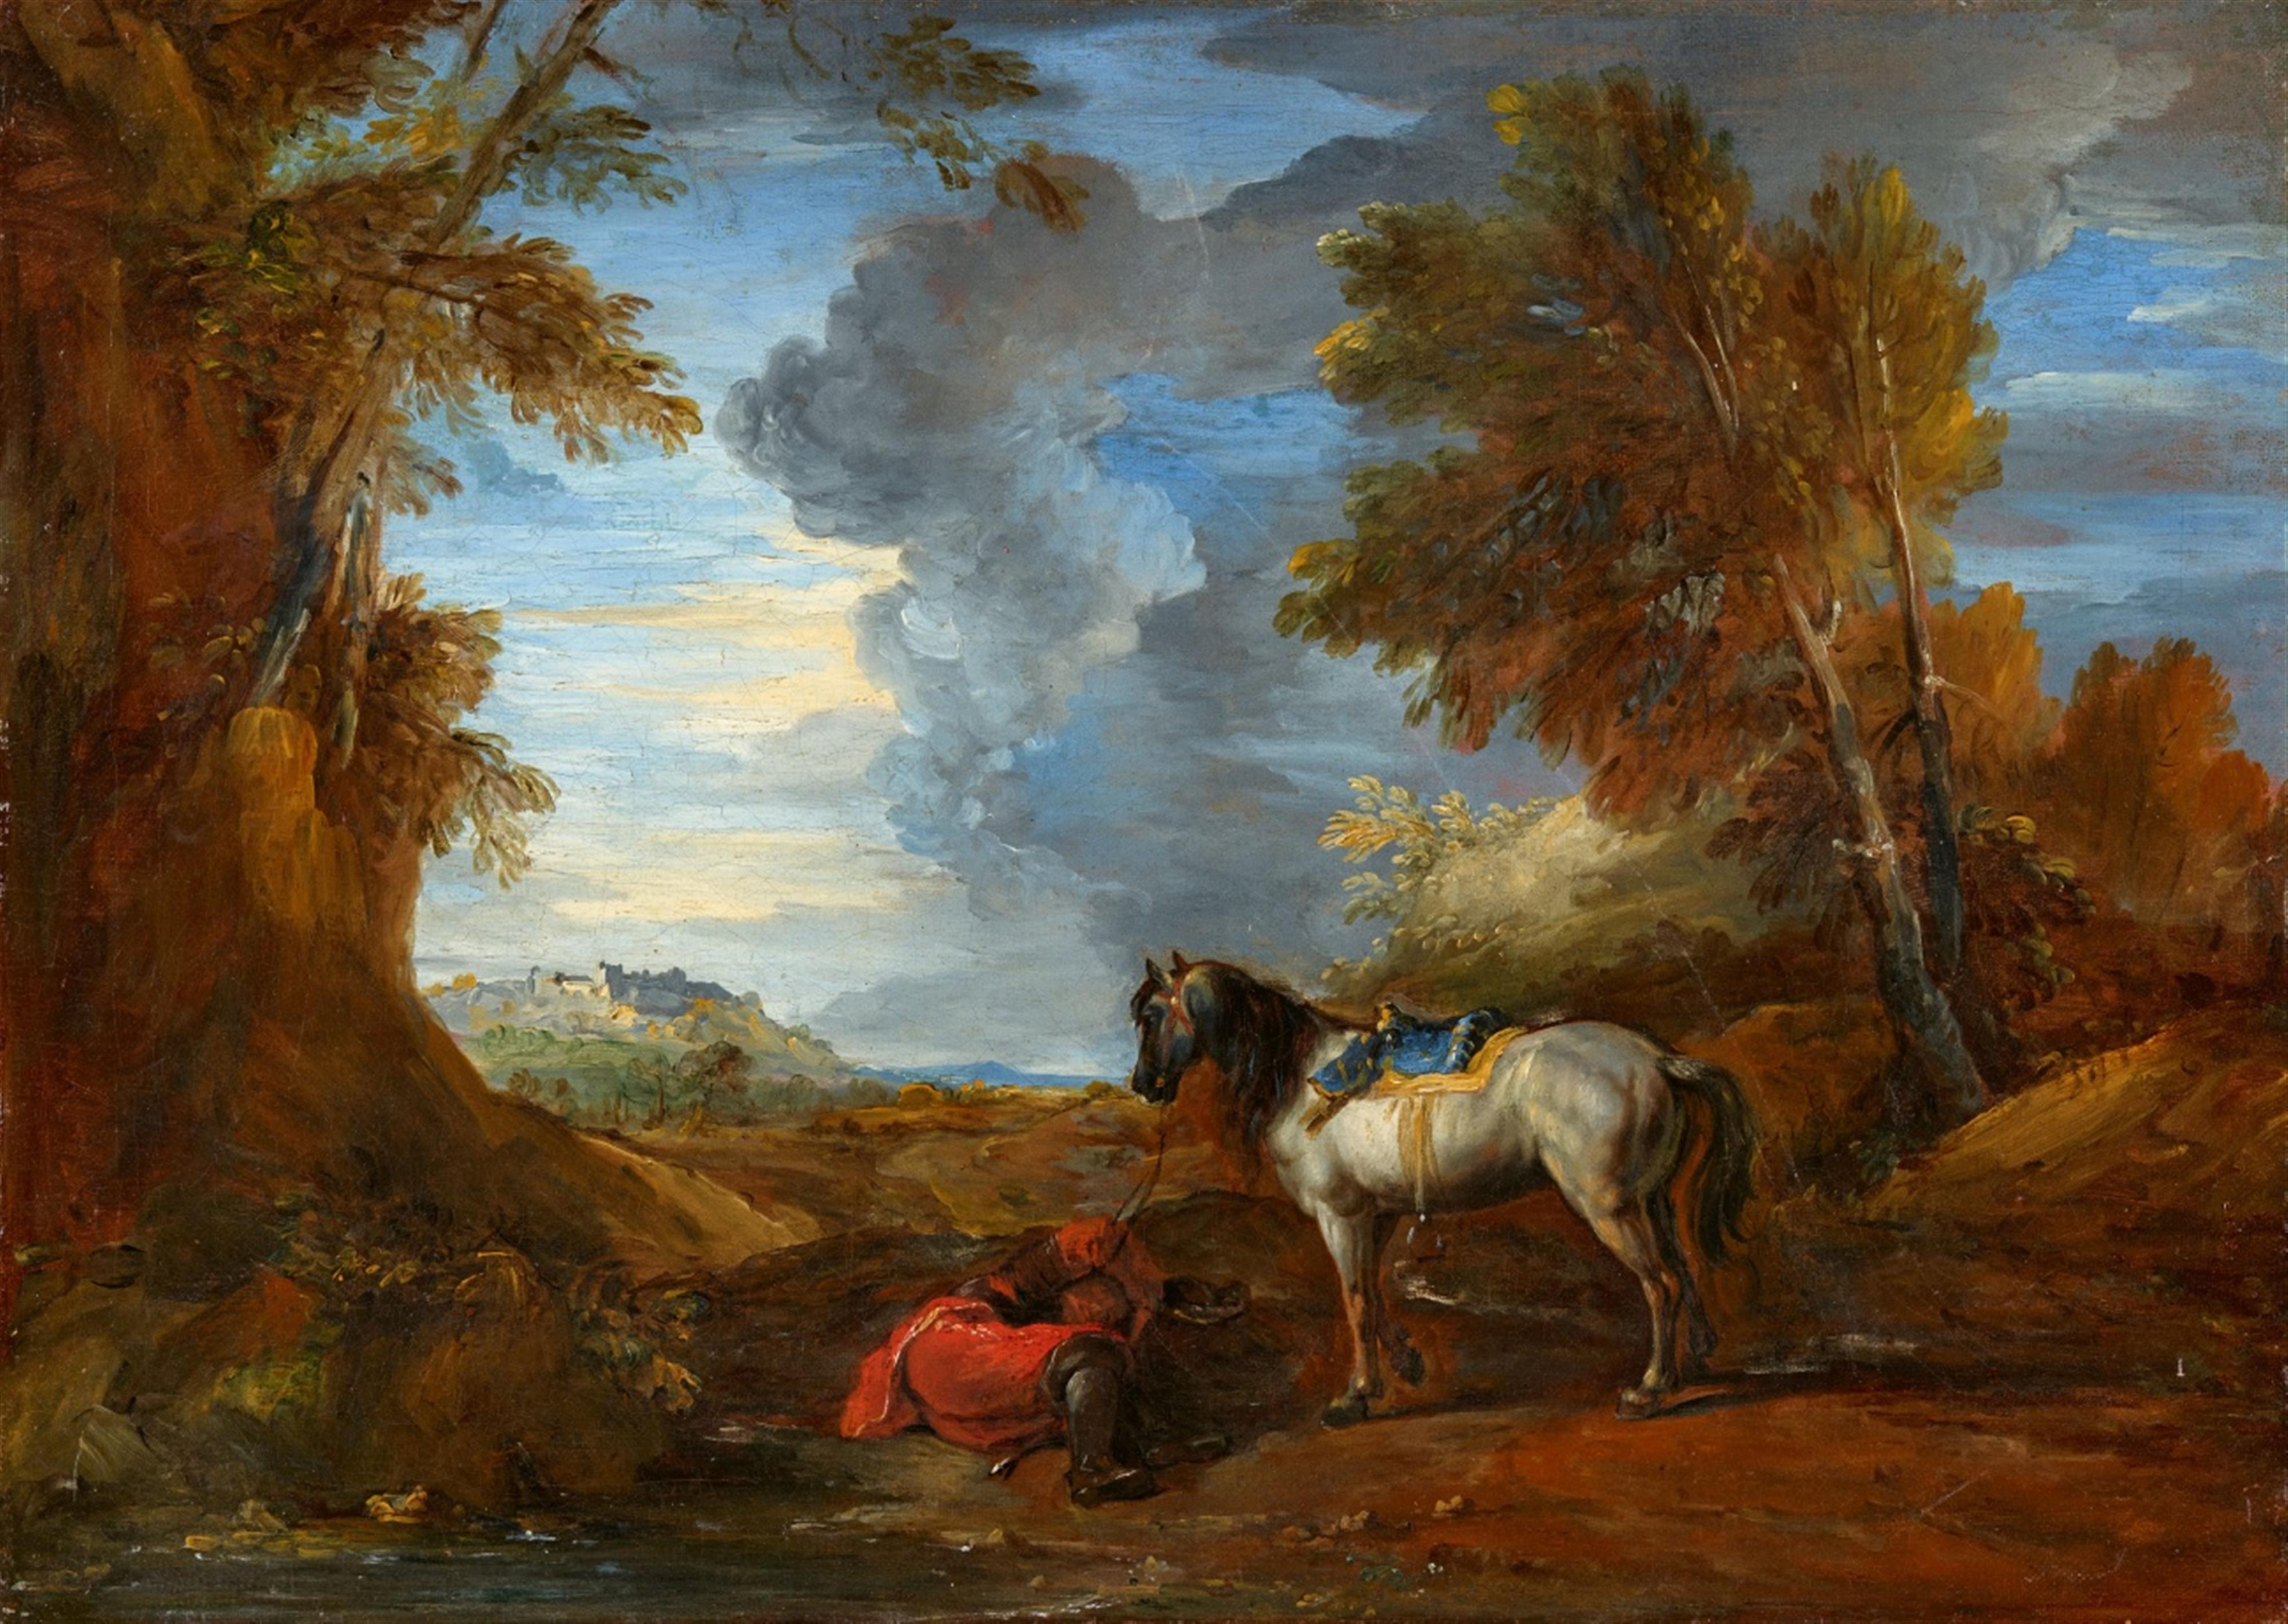 Charles Parrocel - Landscape with a Sleeping Horseman and a Saddled White Horse - image-1